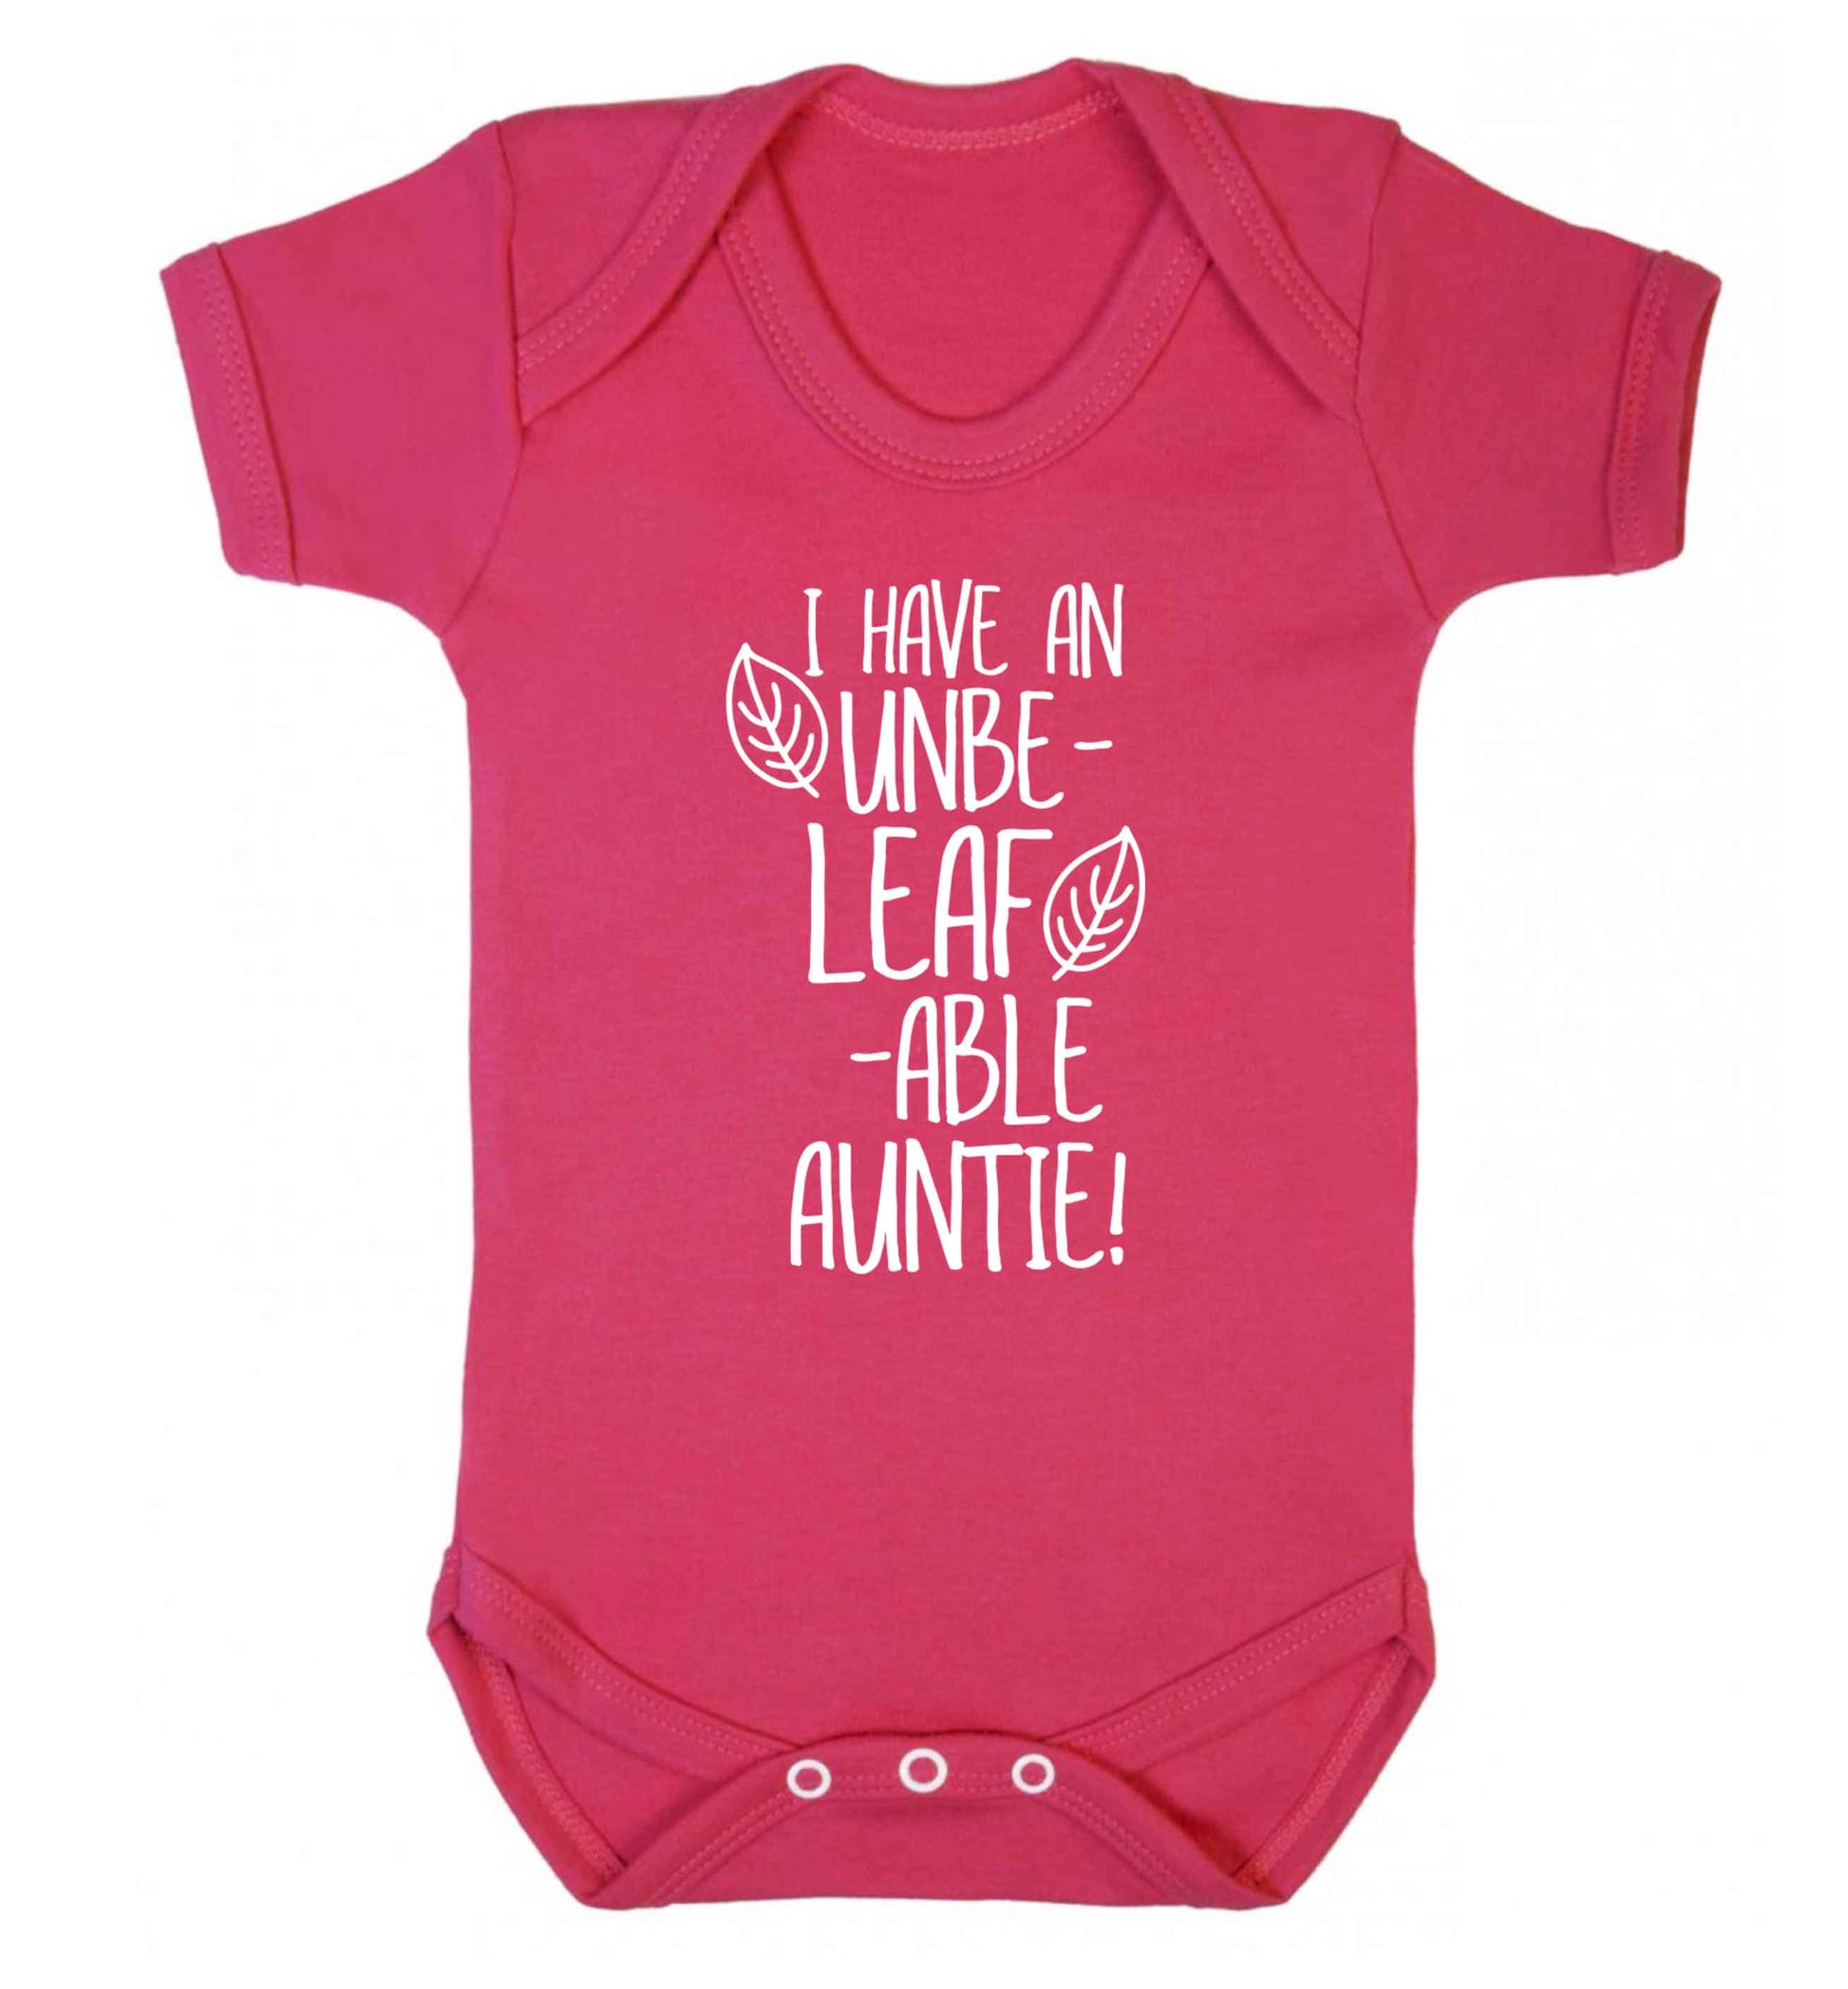 I have an unbe-leaf-able auntie Baby Vest dark pink 18-24 months